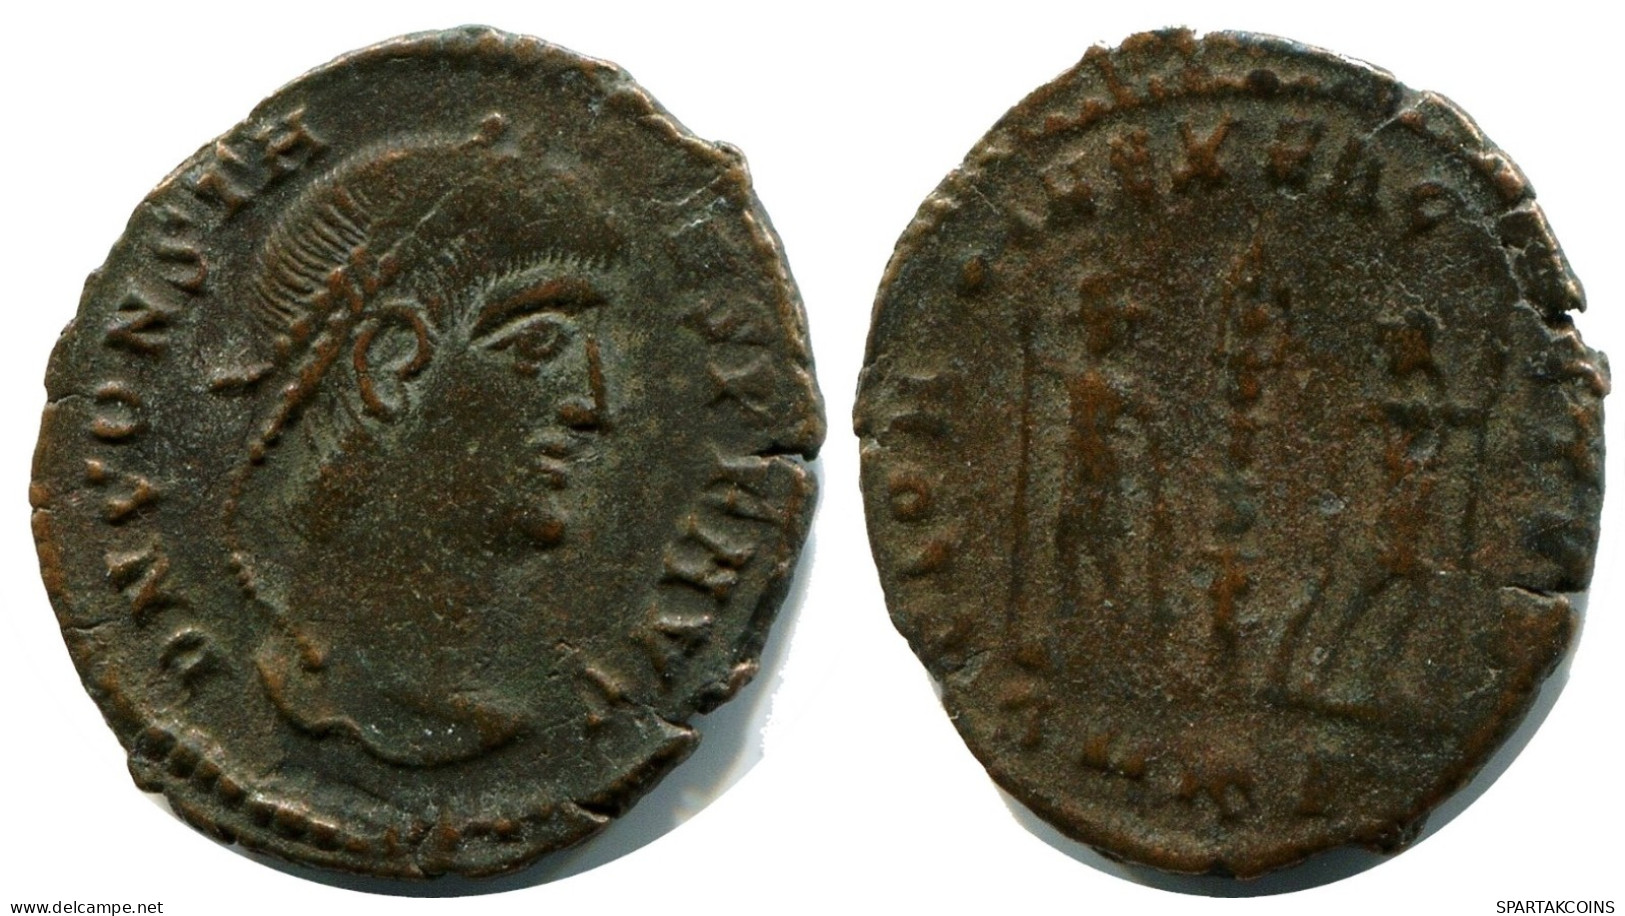 CONSTANS MINTED IN CYZICUS FOUND IN IHNASYAH HOARD EGYPT #ANC11653.14.U.A - El Imperio Christiano (307 / 363)